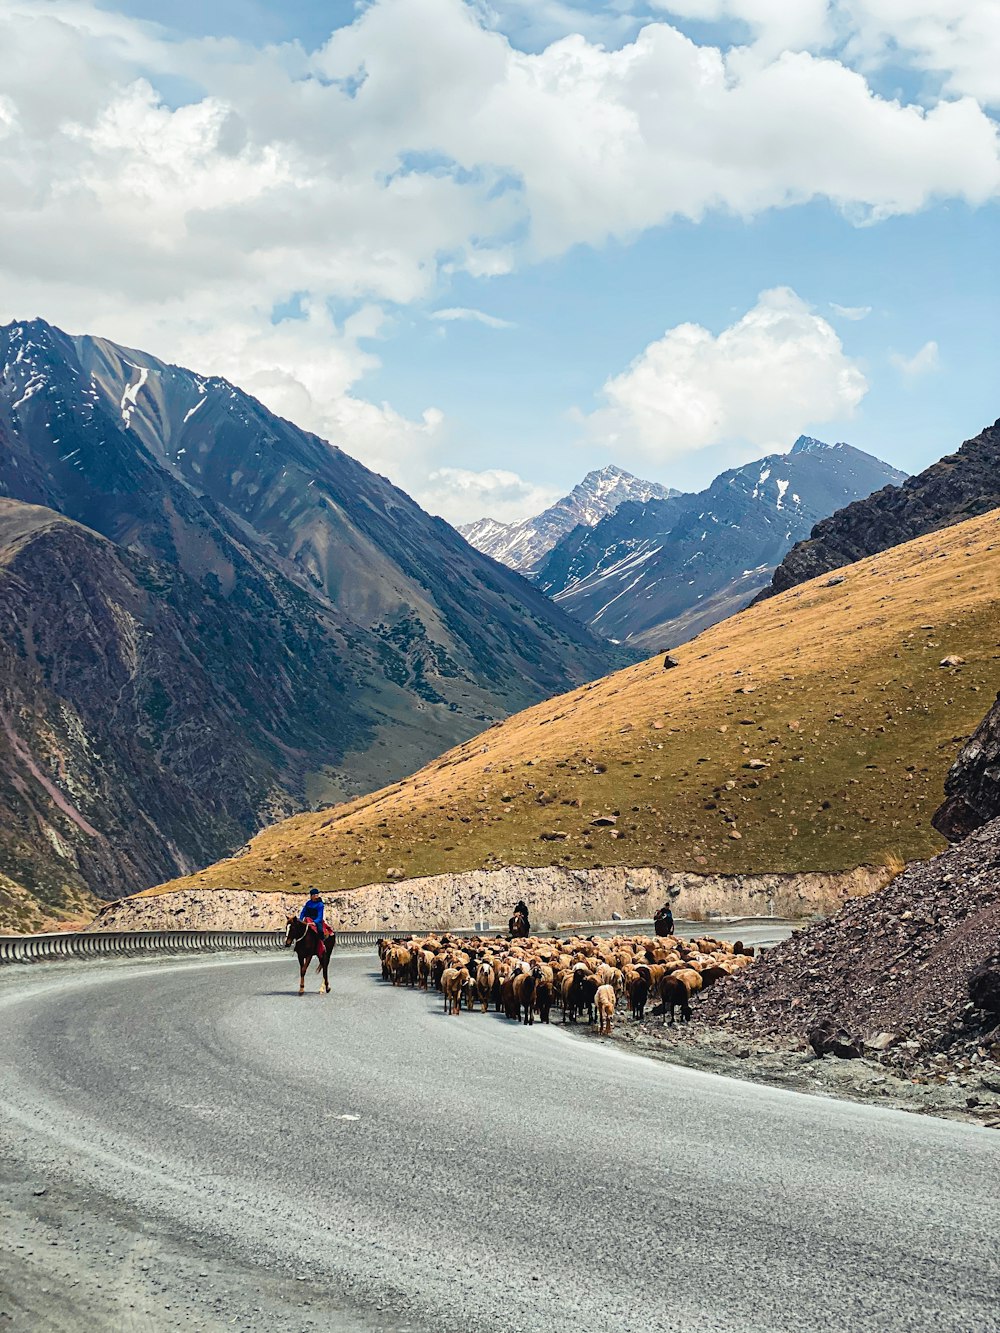 a herd of sheep crossing a road in the mountains